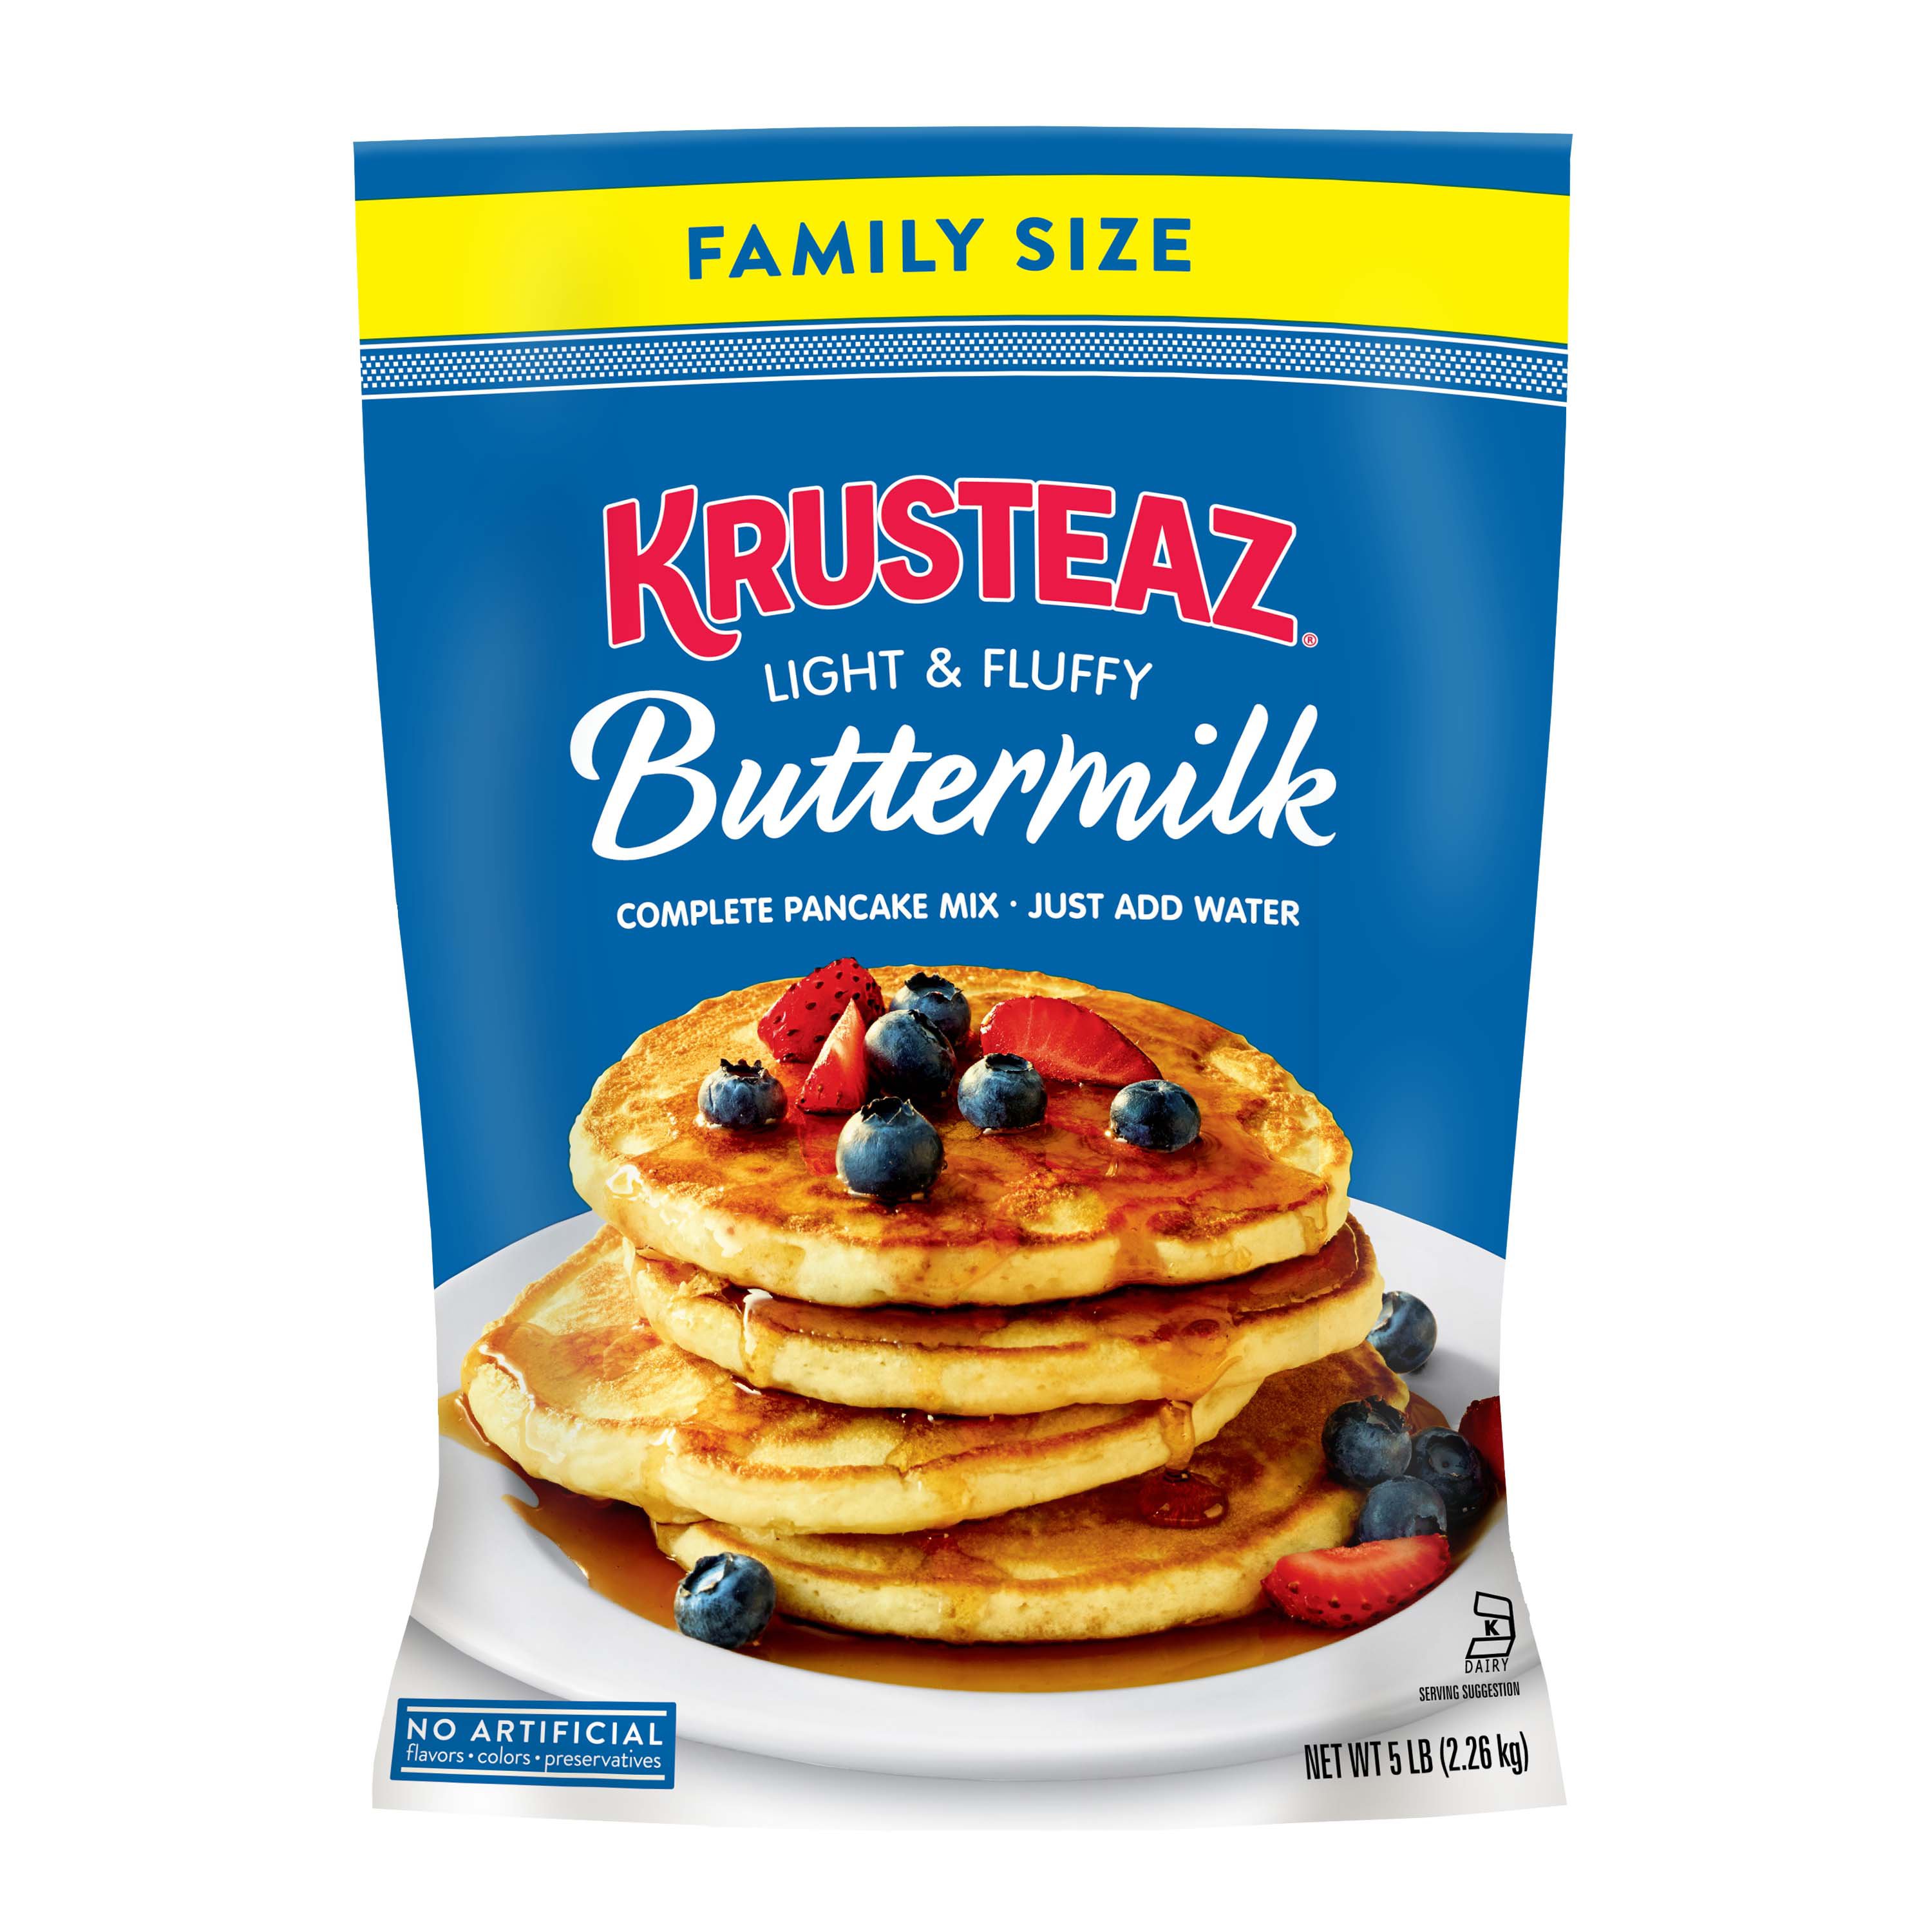 Are Buttermilk Mini Pancakes Safe For Dogs To Eat